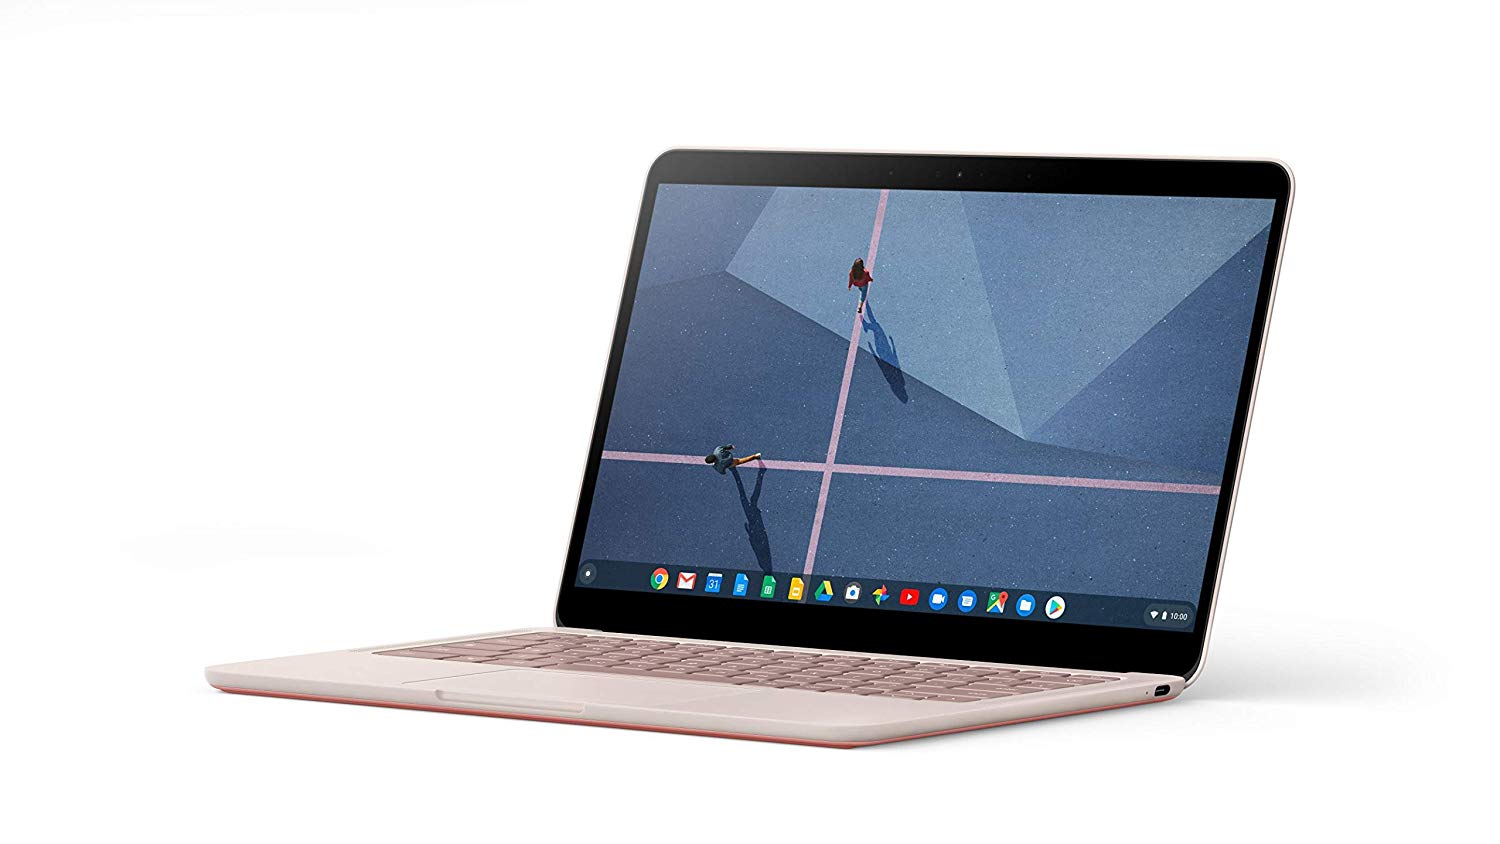 Google Pixelbook Go, one of the best laptops for engineering students, against a white background